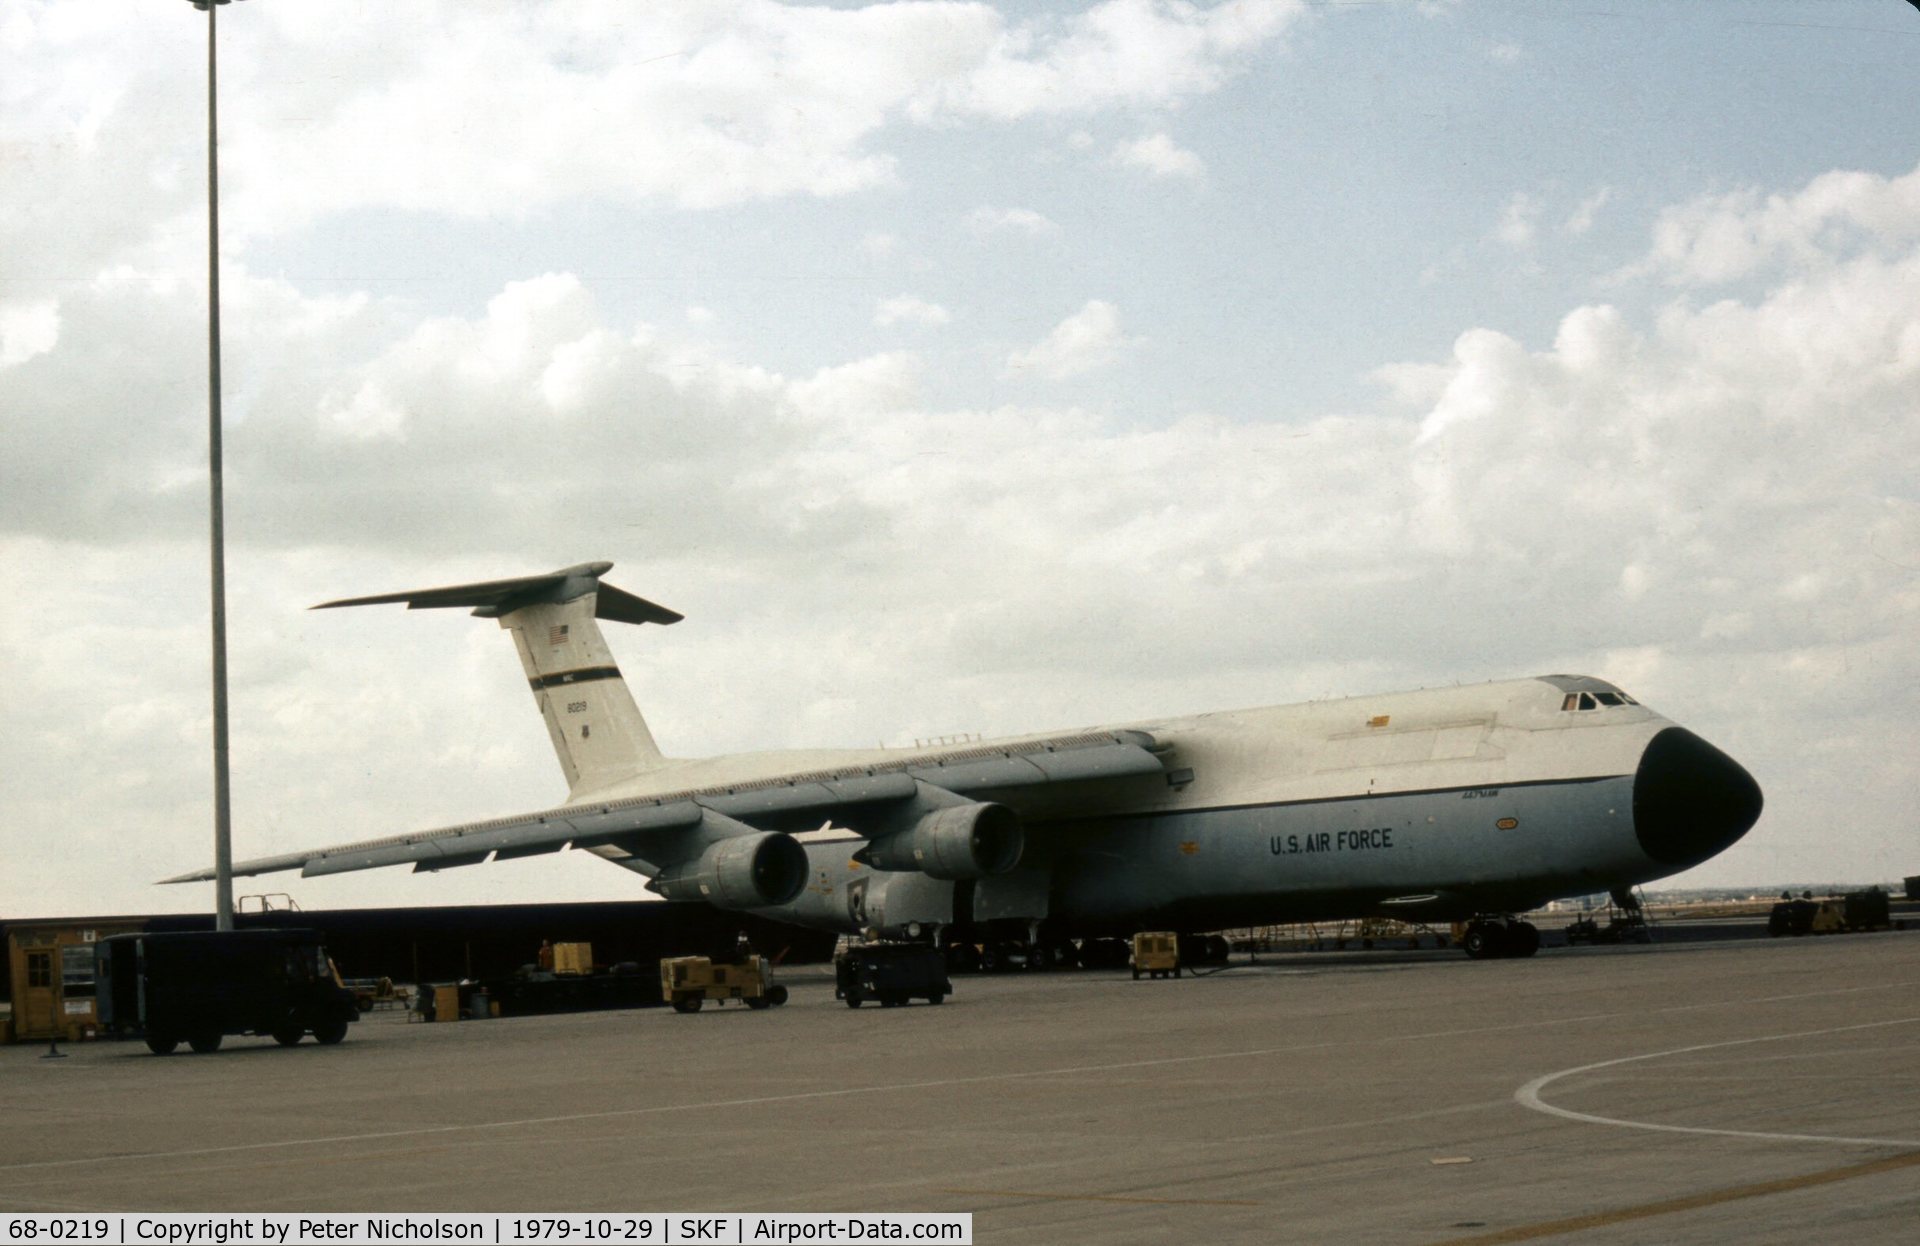 68-0219, 1968 Lockheed C-5A Galaxy C/N 500-0022, C-5A Galaxy of 443rd Military Airlift Wing seen at Kelly AFB in October 1979.